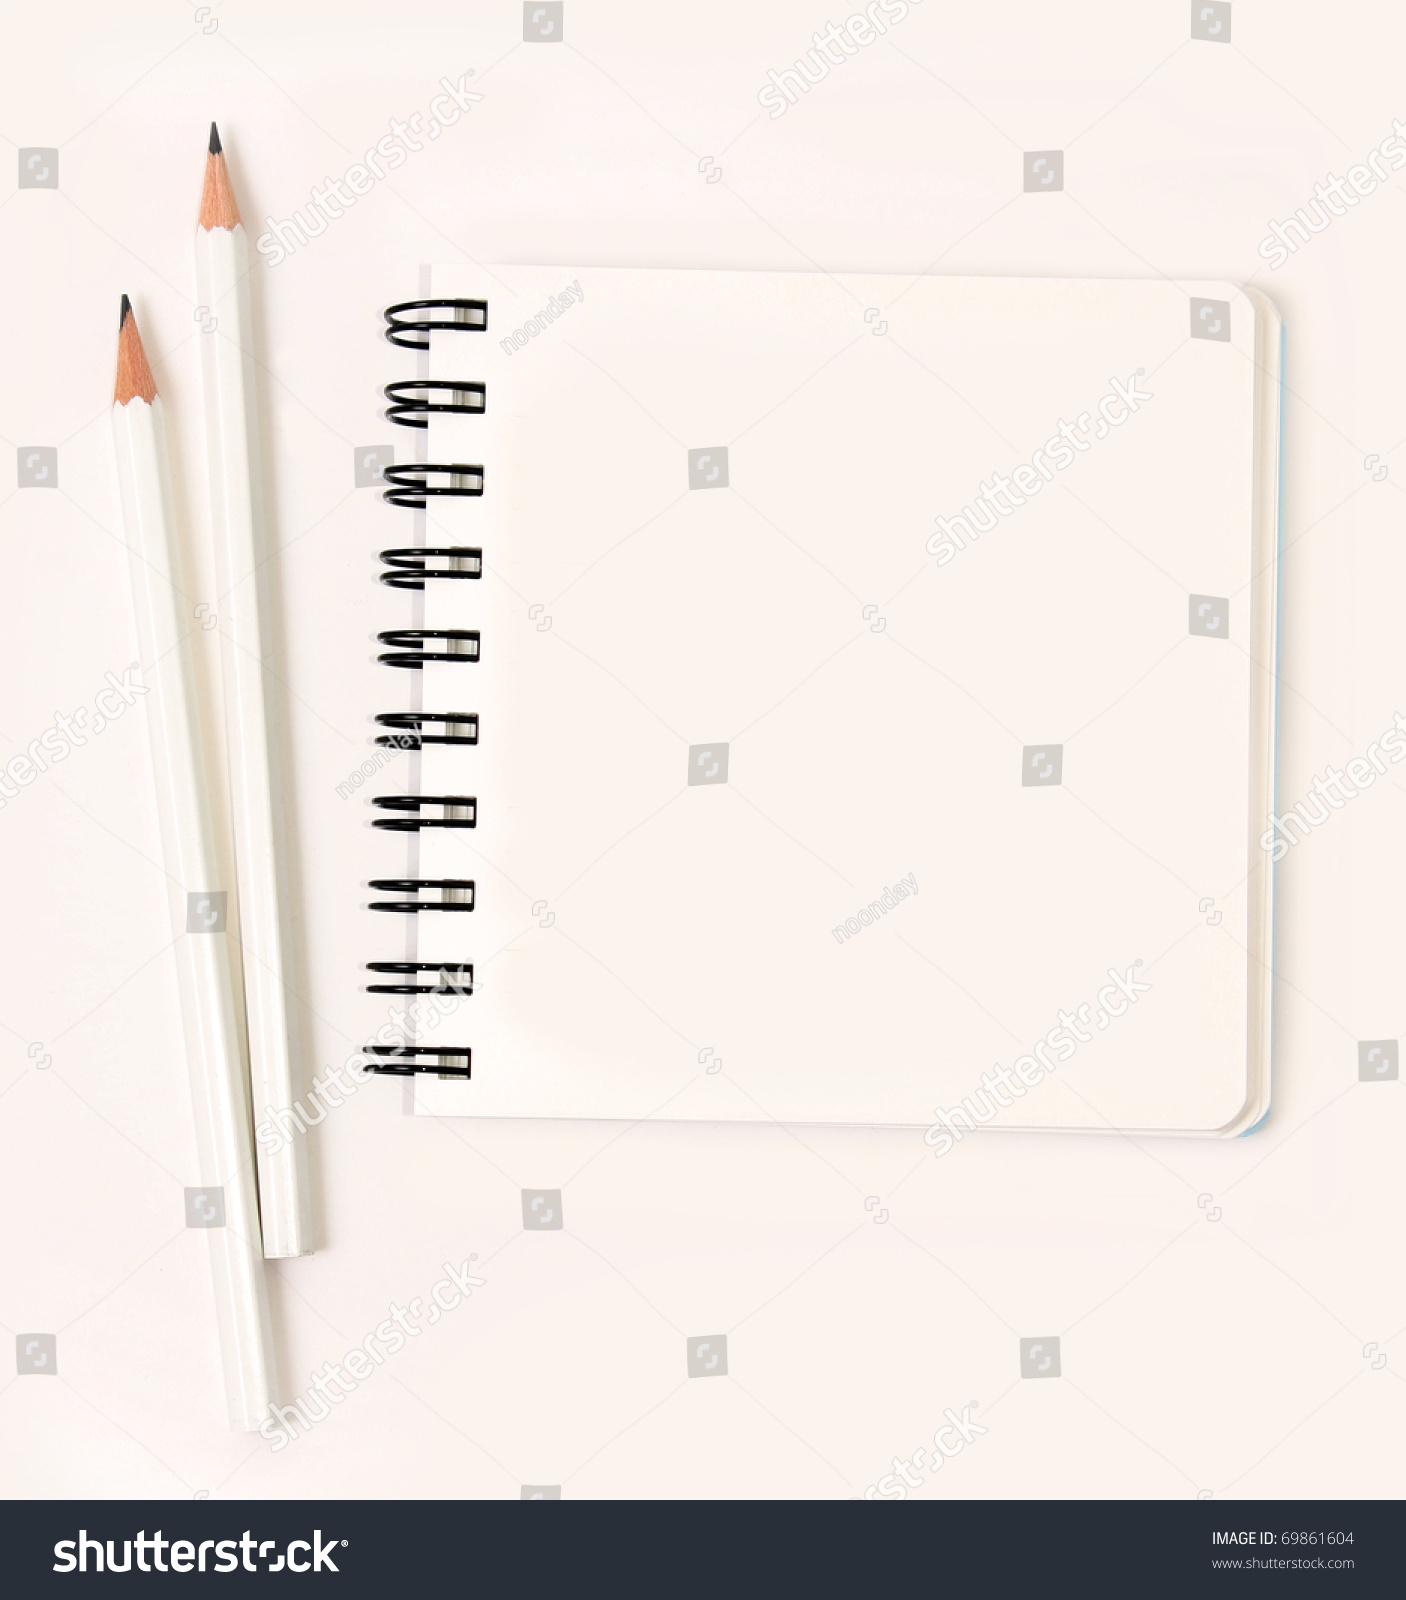 square notebook with white pencils #69861604